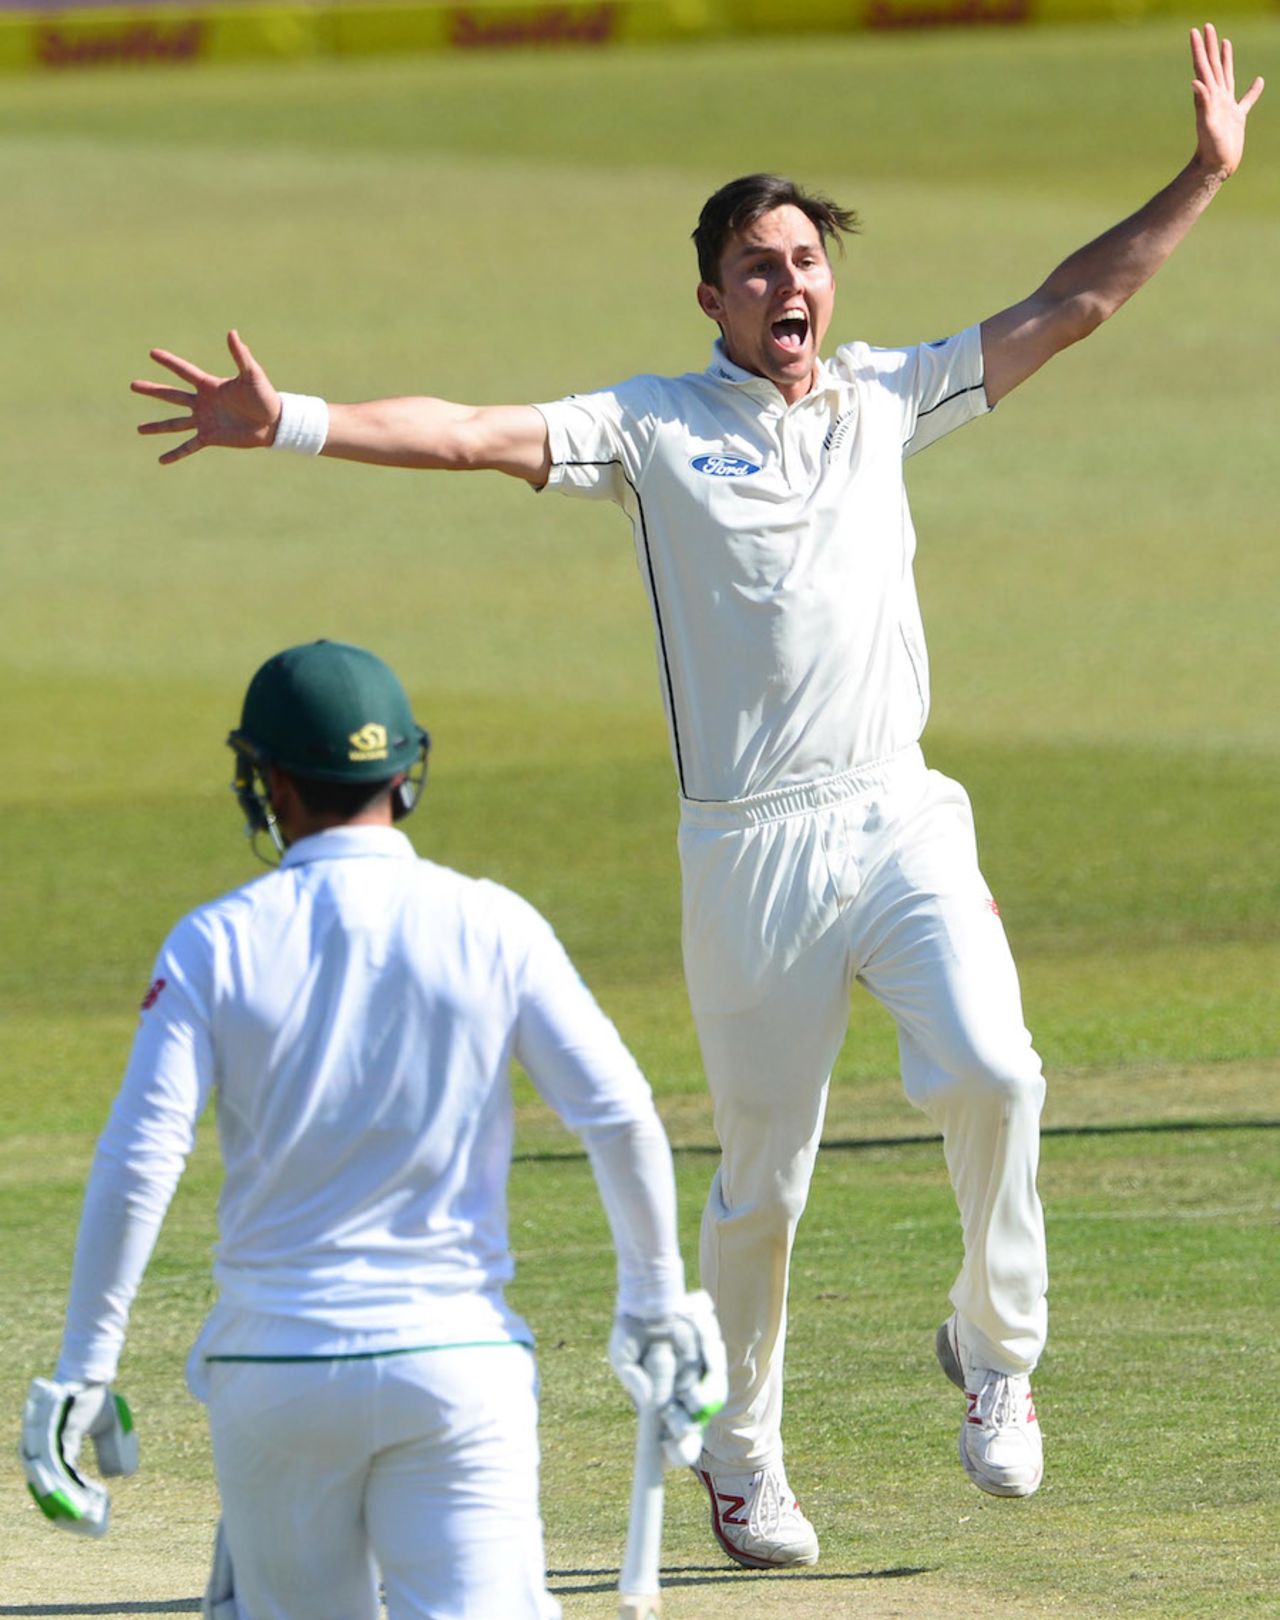 Trent Boult goes up in an appeal, South Africa v New Zealand, 2nd Test, Centurion, 3rd day, August 29, 2016